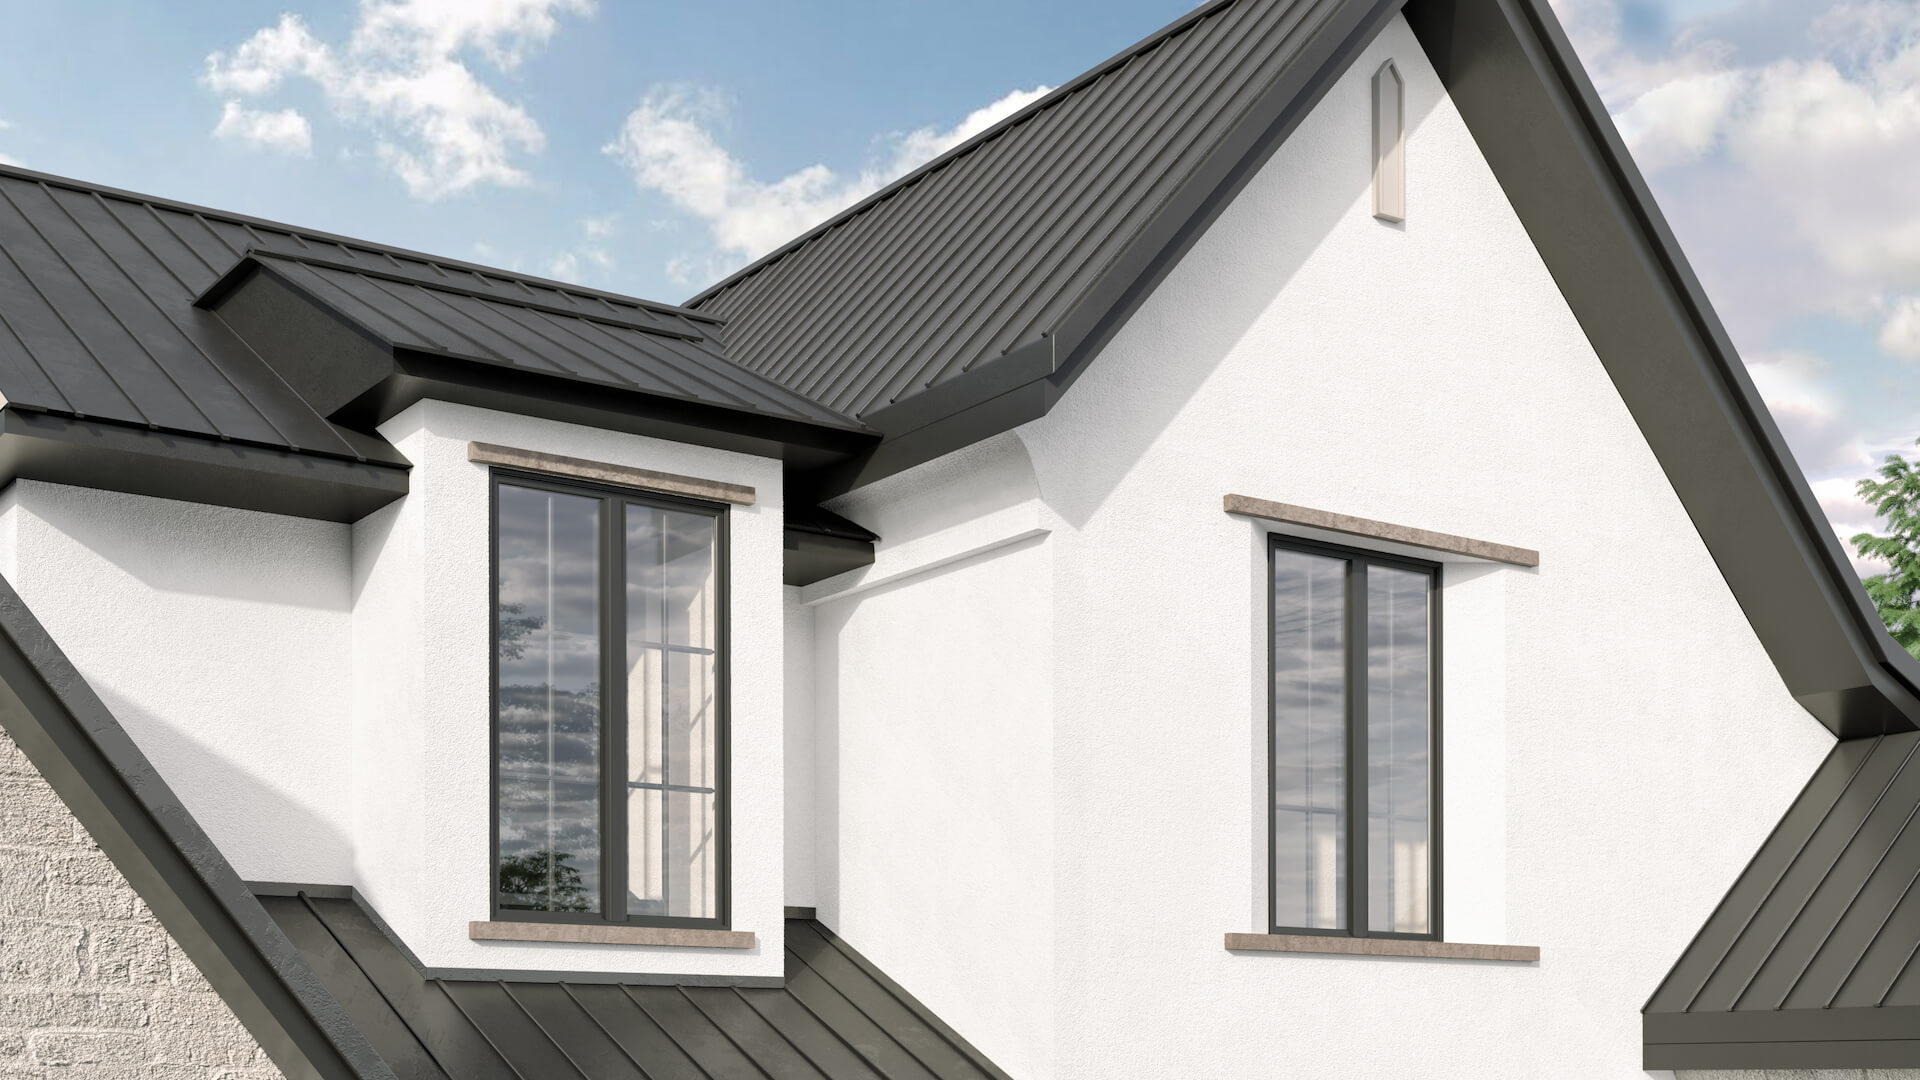 A rendering of the exterior of a house using StoneCoat Products